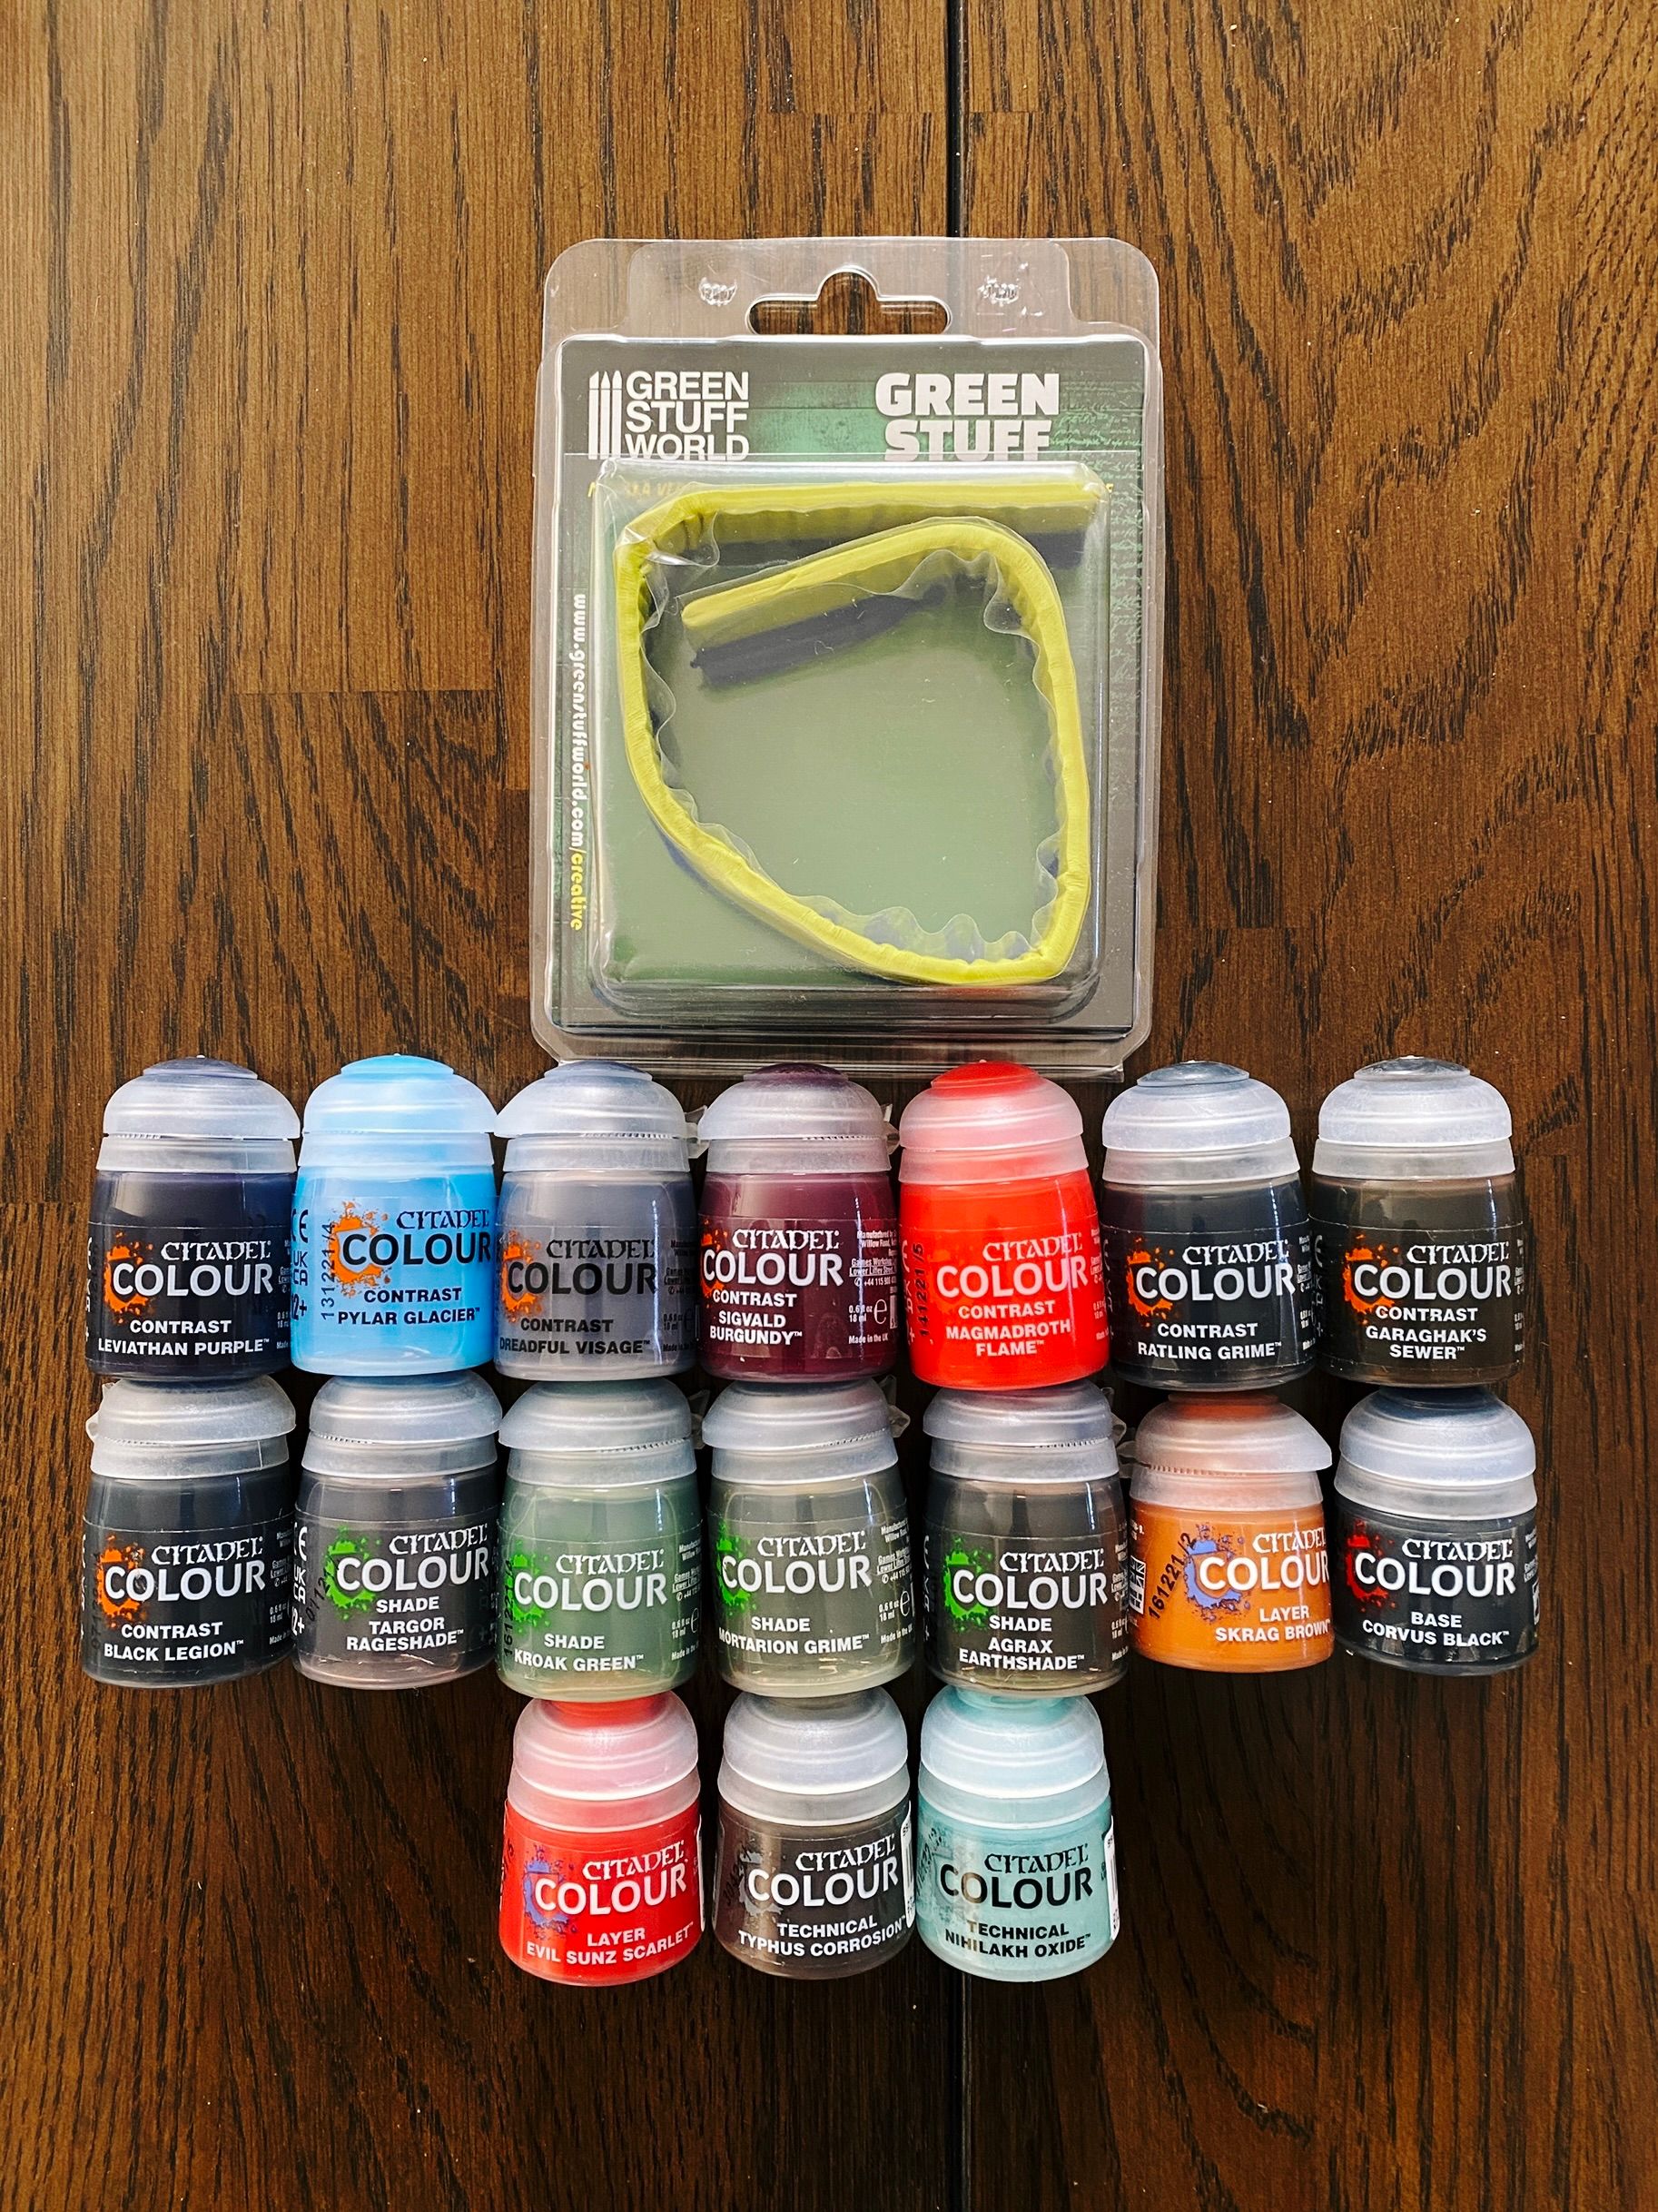 A photo of seventeen little pots of miniature paint, plus a roll of "Green Stuff" which is used for modelling and filling gaps in miniatures.